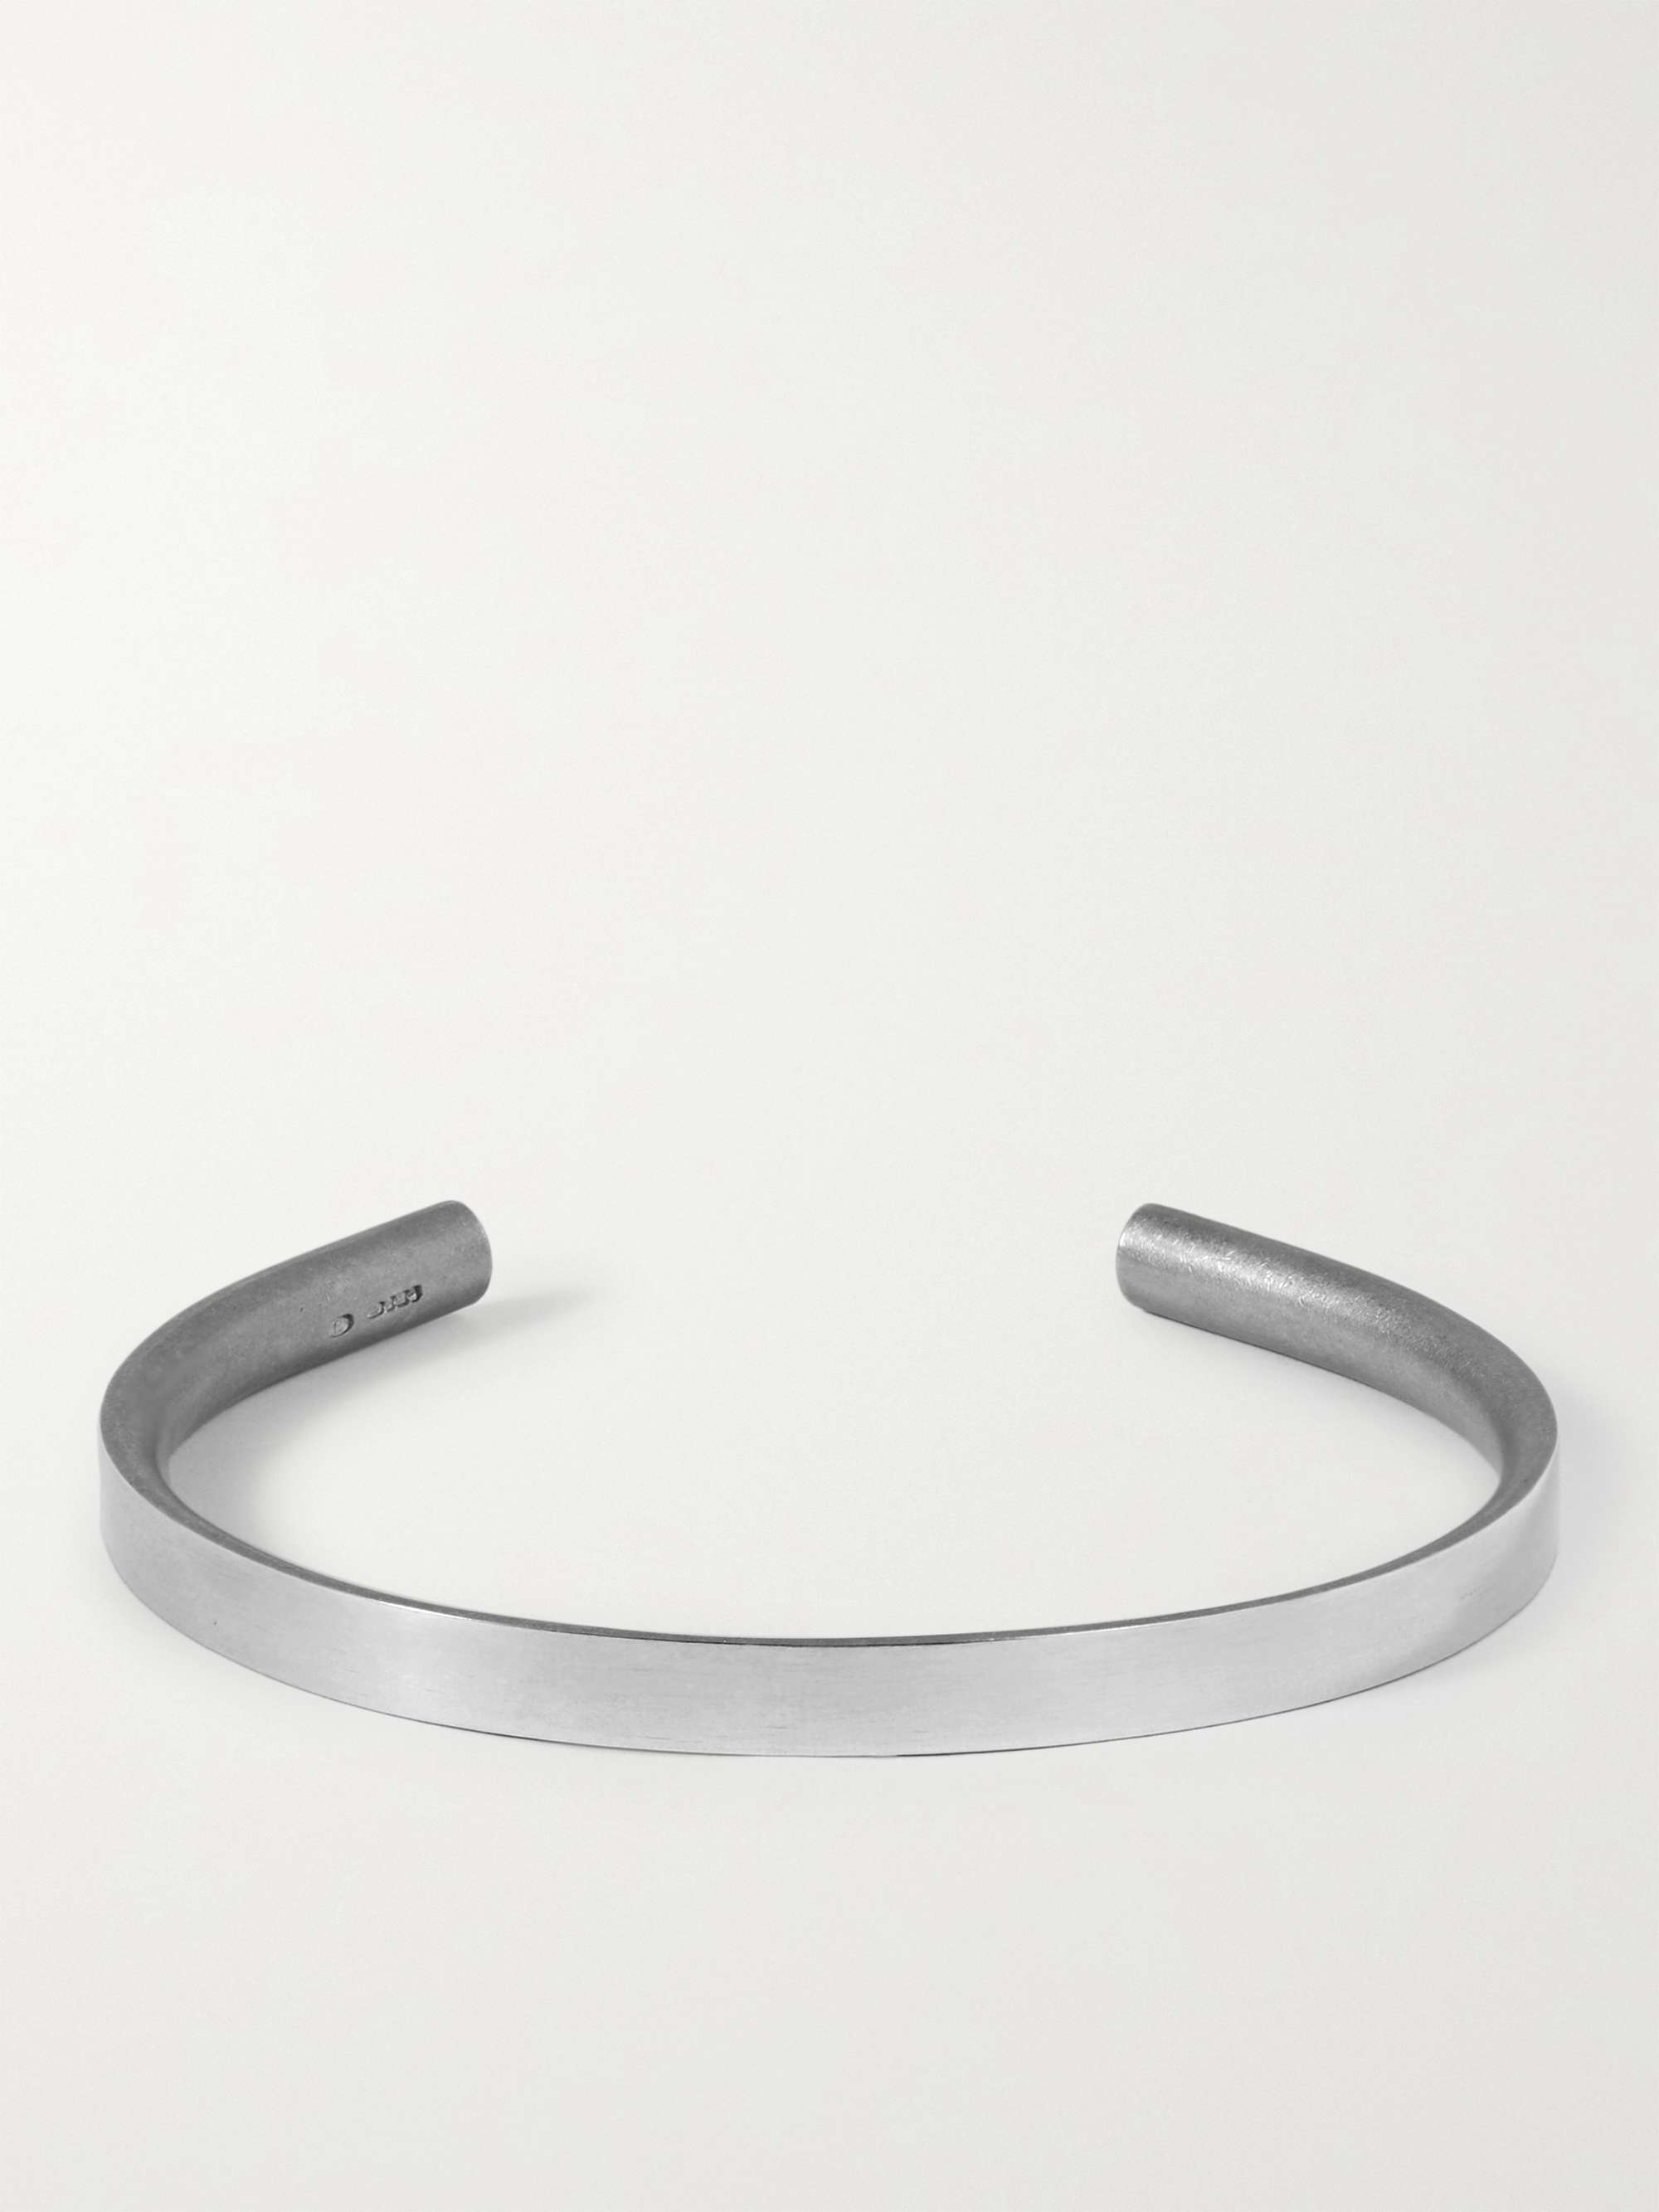 ALICE MADE THIS P6 Bancroft Polished Sterling Silver Cuff